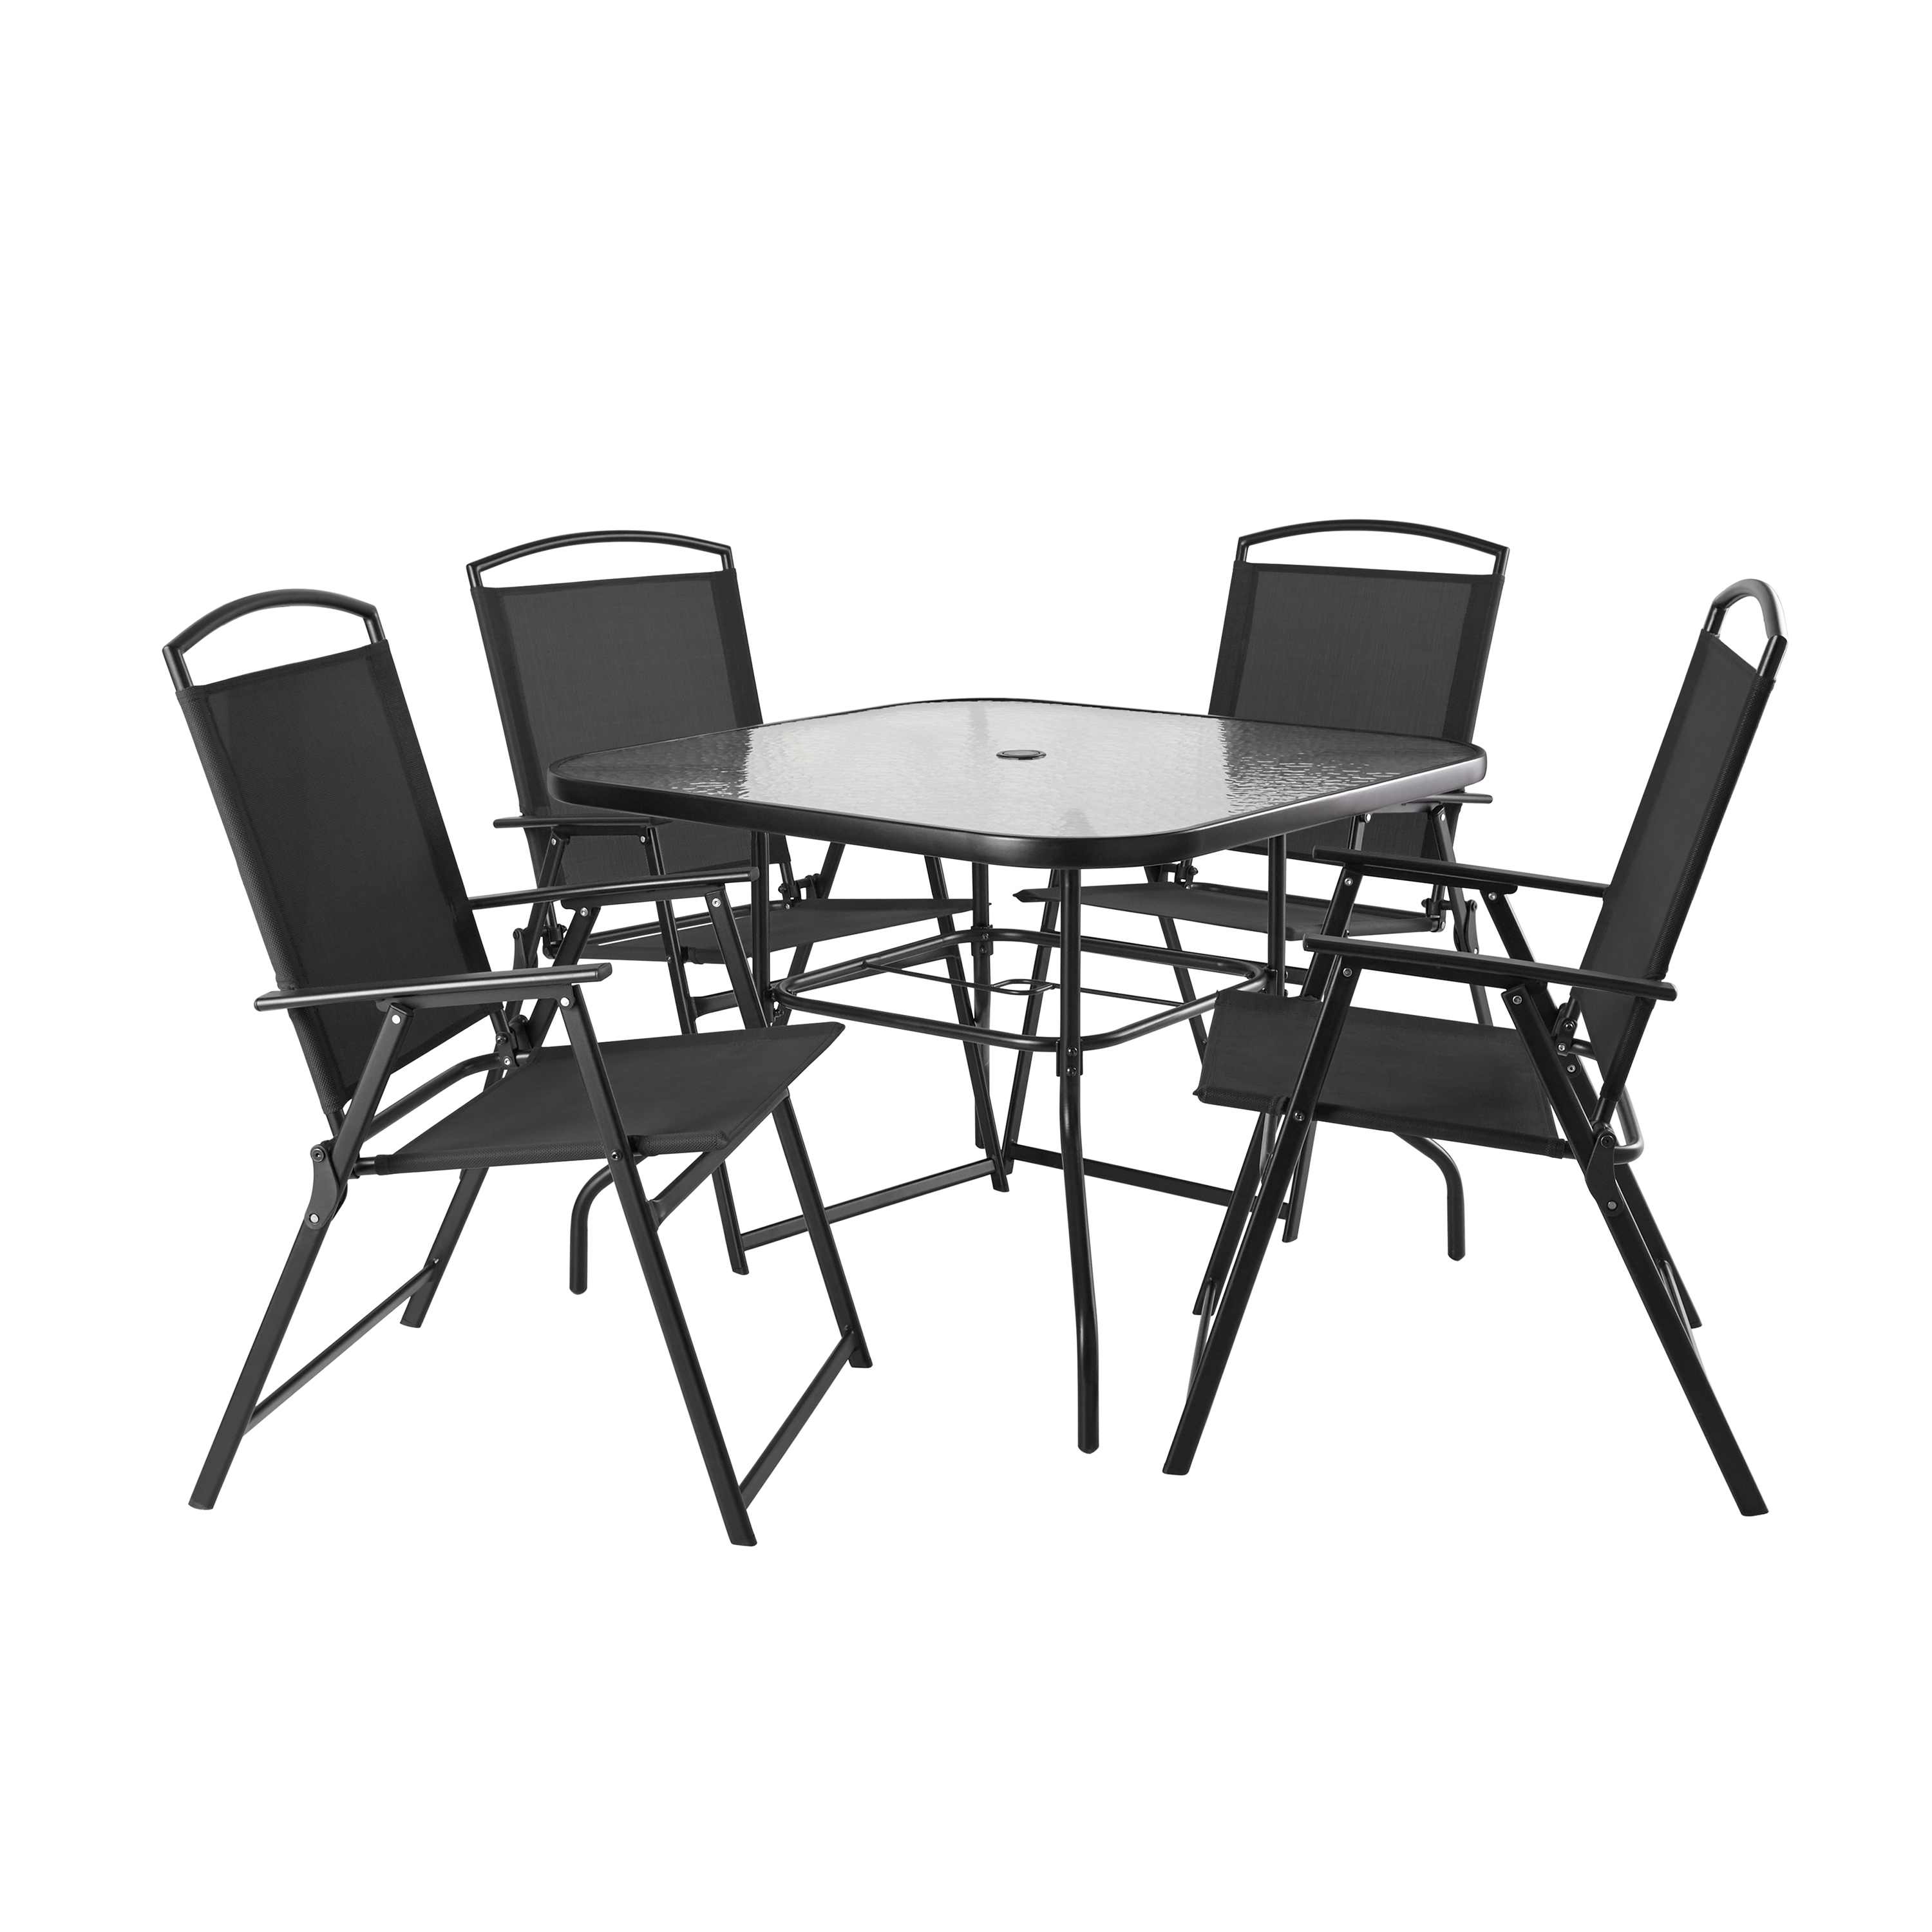 Mainstays Albany Lane Outdoor Patio 5 Piece Dining Set, Black Frame and Sling, 4 Person $99